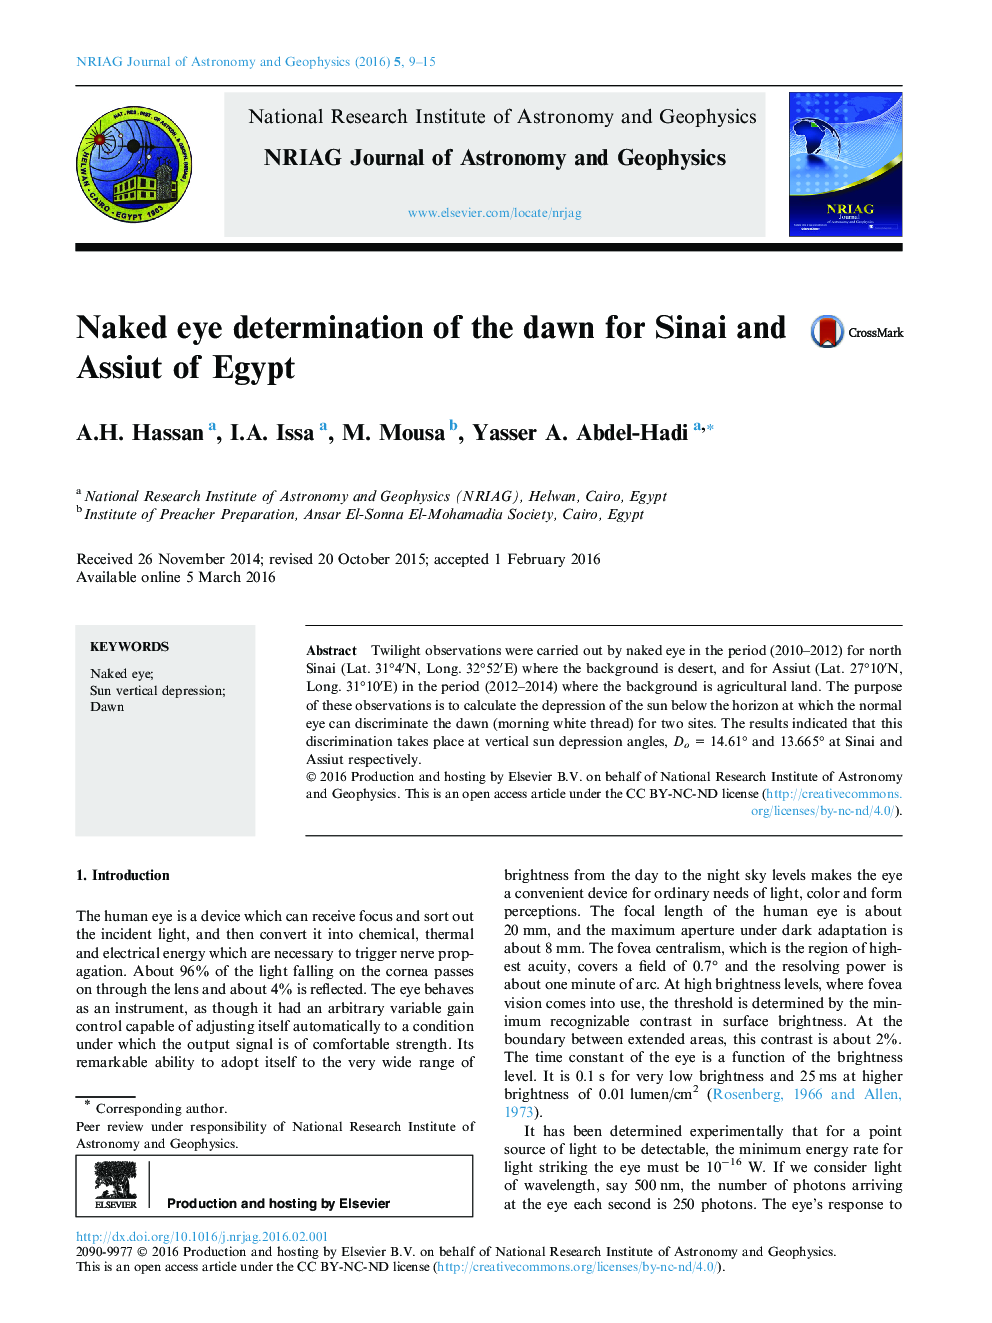 Naked eye determination of the dawn for Sinai and Assiut of Egypt 